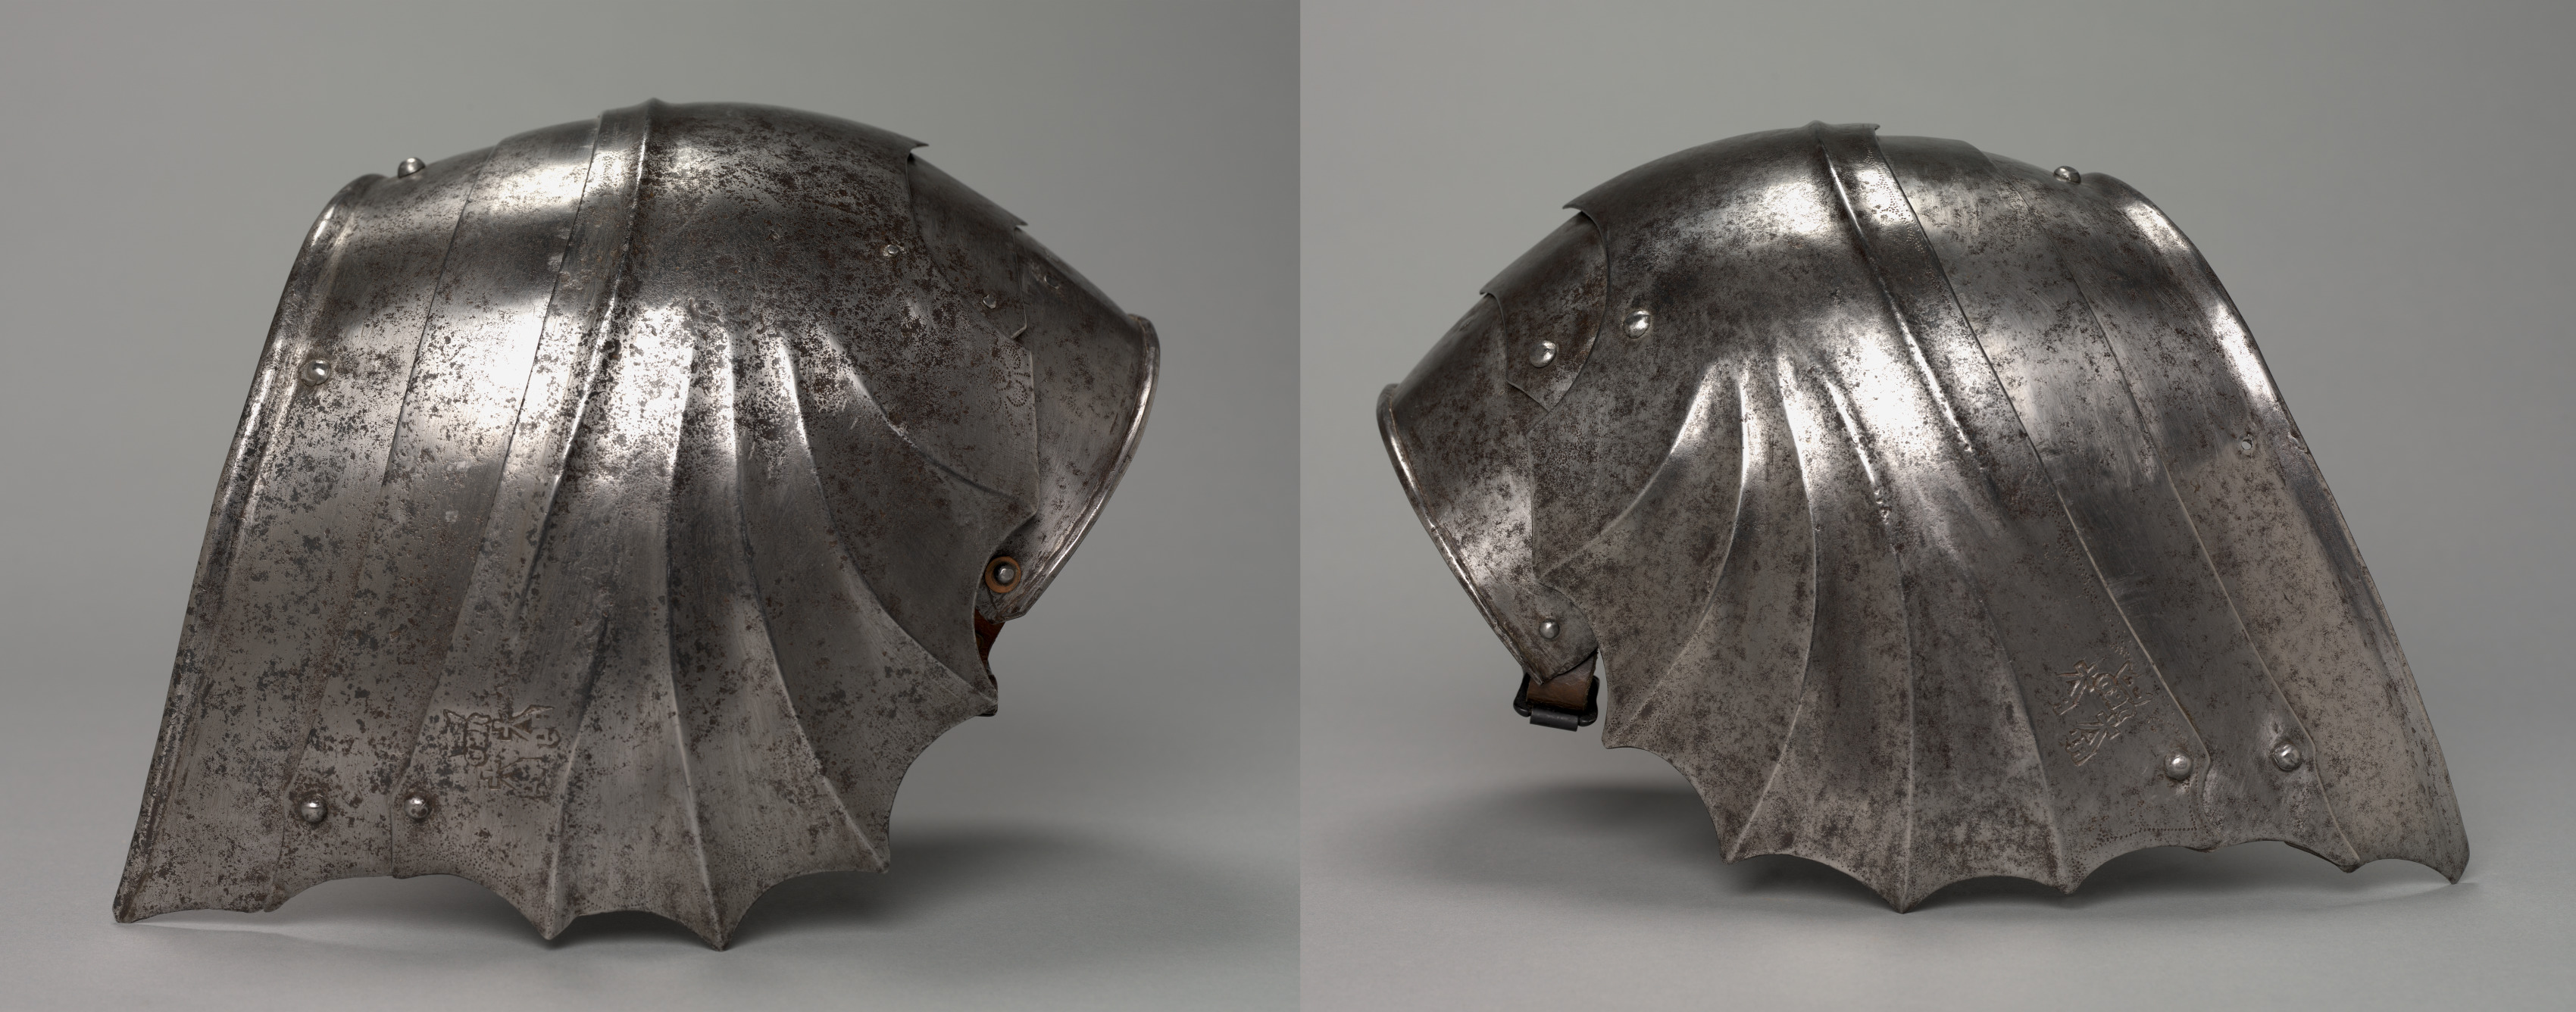 Pair of Gothic Fan-Shaped Pauldron